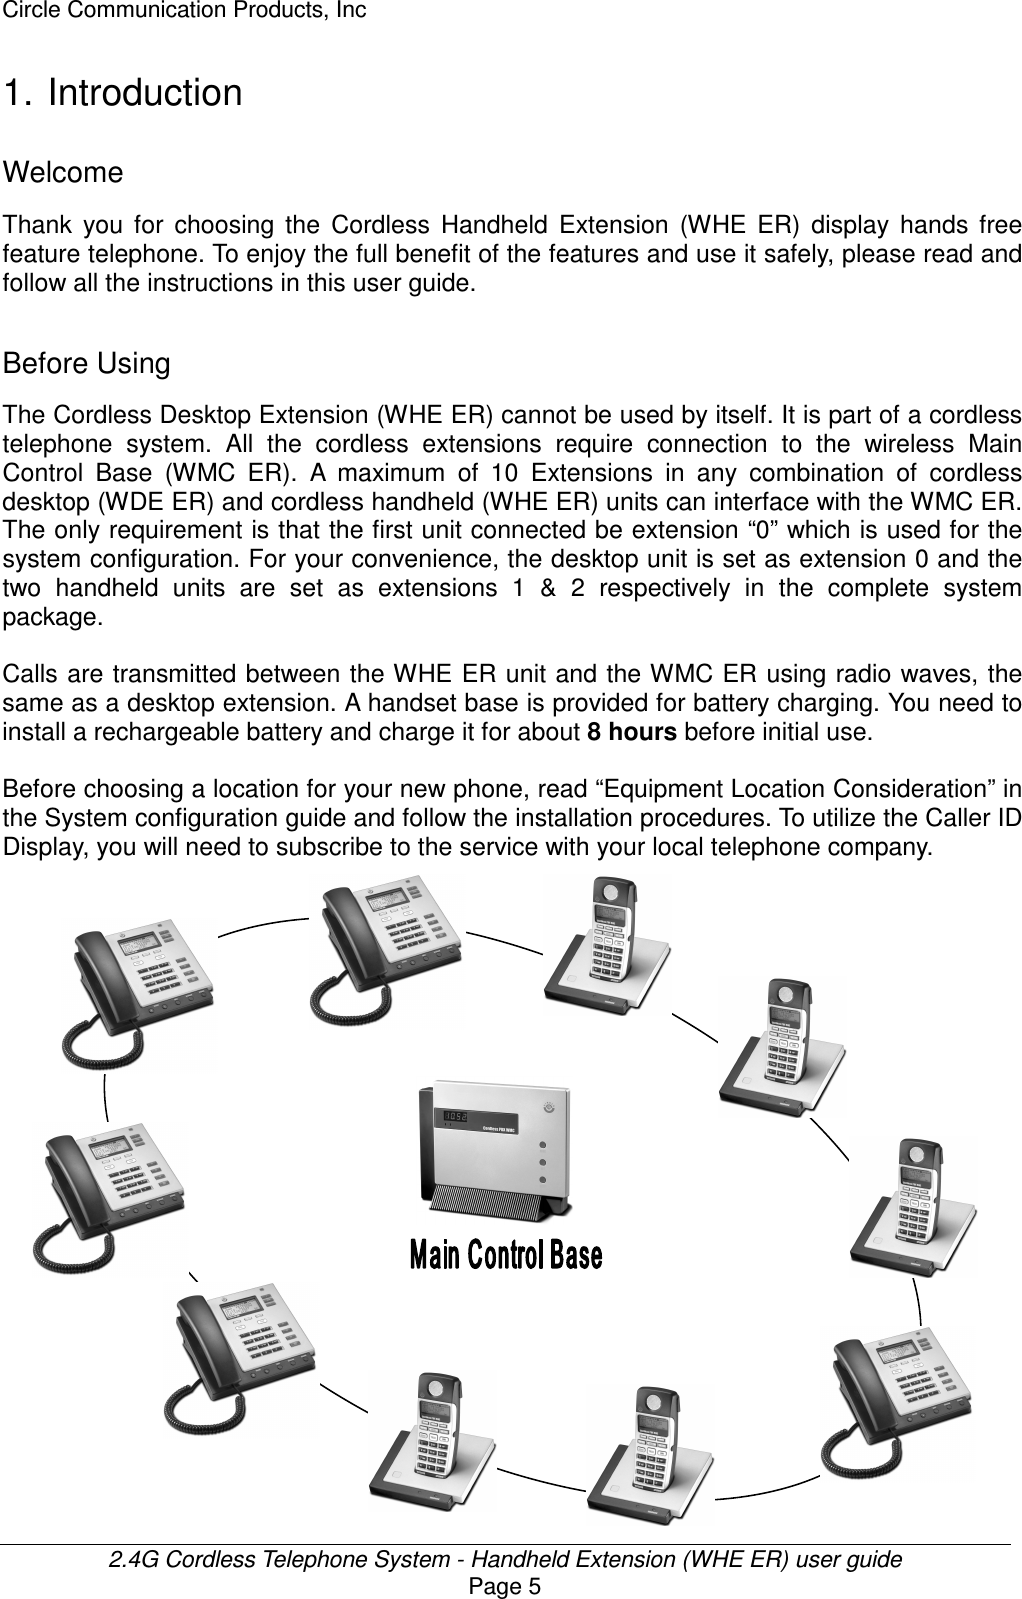 Circle Communication Products, Inc  2.4G Cordless Telephone System - Handheld Extension (WHE ER) user guide Page 5 1. Introduction Welcome Thank  you  for  choosing  the  Cordless  Handheld  Extension  (WHE  ER)  display  hands  free feature telephone. To enjoy the full benefit of the features and use it safely, please read and follow all the instructions in this user guide.  Before Using The Cordless Desktop Extension (WHE ER) cannot be used by itself. It is part of a cordless telephone  system.  All  the  cordless  extensions  require  connection  to  the  wireless  Main Control  Base  (WMC  ER).  A  maximum  of  10  Extensions  in  any  combination  of  cordless desktop (WDE ER) and cordless handheld (WHE ER) units can interface with the WMC ER. The only requirement is that the first unit connected be extension “0” which is used for the system configuration. For your convenience, the desktop unit is set as extension 0 and the two  handheld  units  are  set  as  extensions  1  &amp;  2  respectively  in  the  complete  system package.  Calls are transmitted between the WHE ER unit and the WMC ER using radio waves, the same as a desktop extension. A handset base is provided for battery charging. You need to install a rechargeable battery and charge it for about 8 hours before initial use.  Before choosing a location for your new phone, read “Equipment Location Consideration” in the System configuration guide and follow the installation procedures. To utilize the Caller ID Display, you will need to subscribe to the service with your local telephone company.    